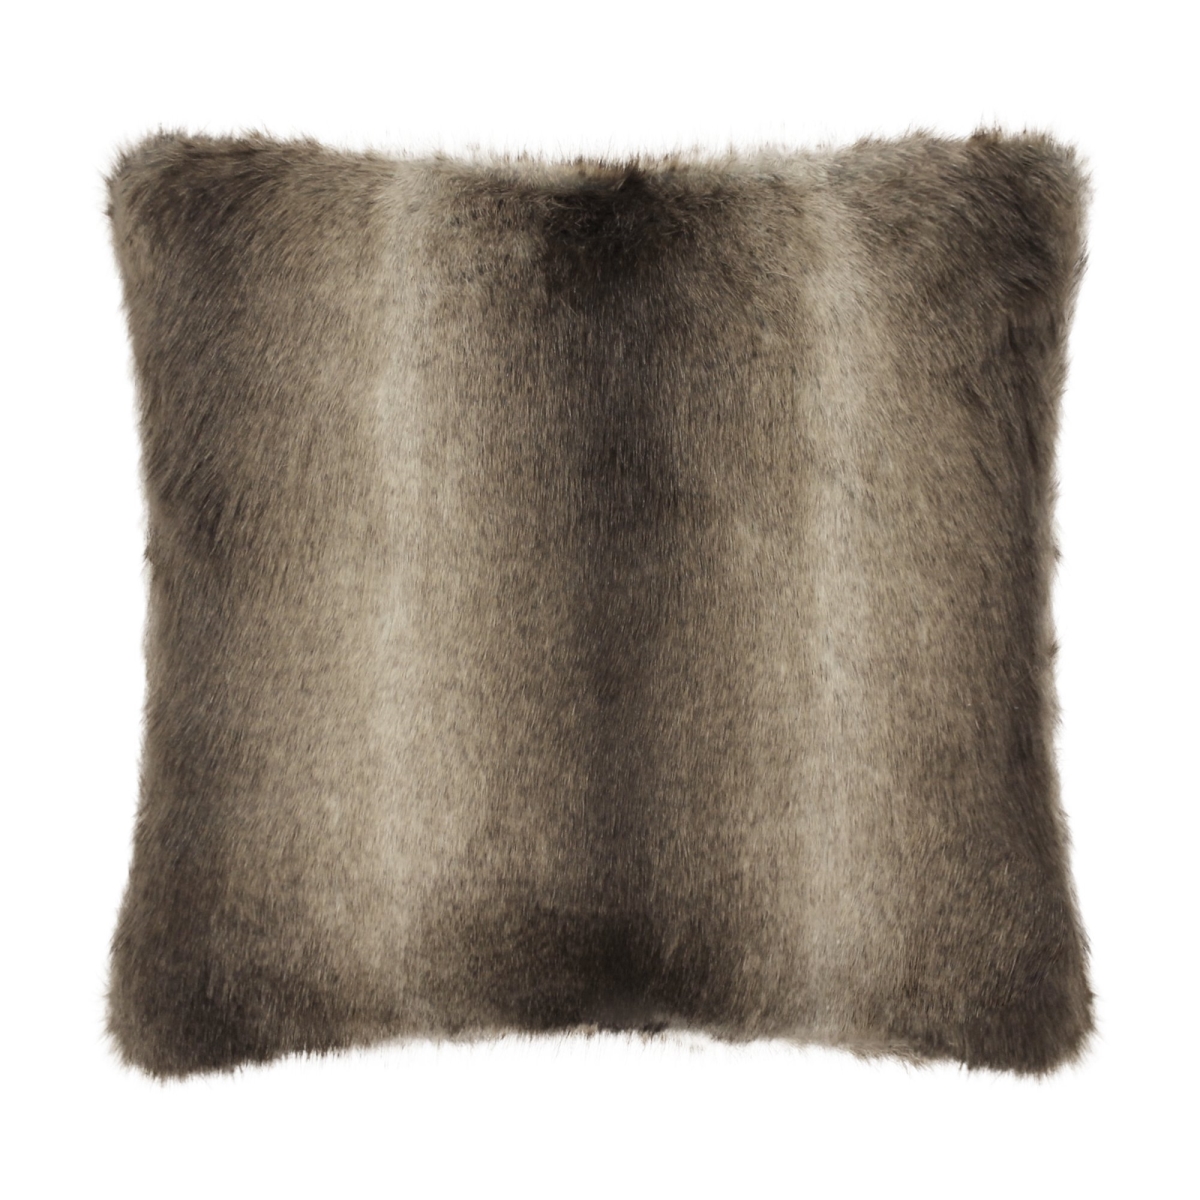 Sq-pi-wbeff-1818 18 X 18 In. Wolf Faux Fur Decorative Cushion, Beige - 100 Percent Polyester